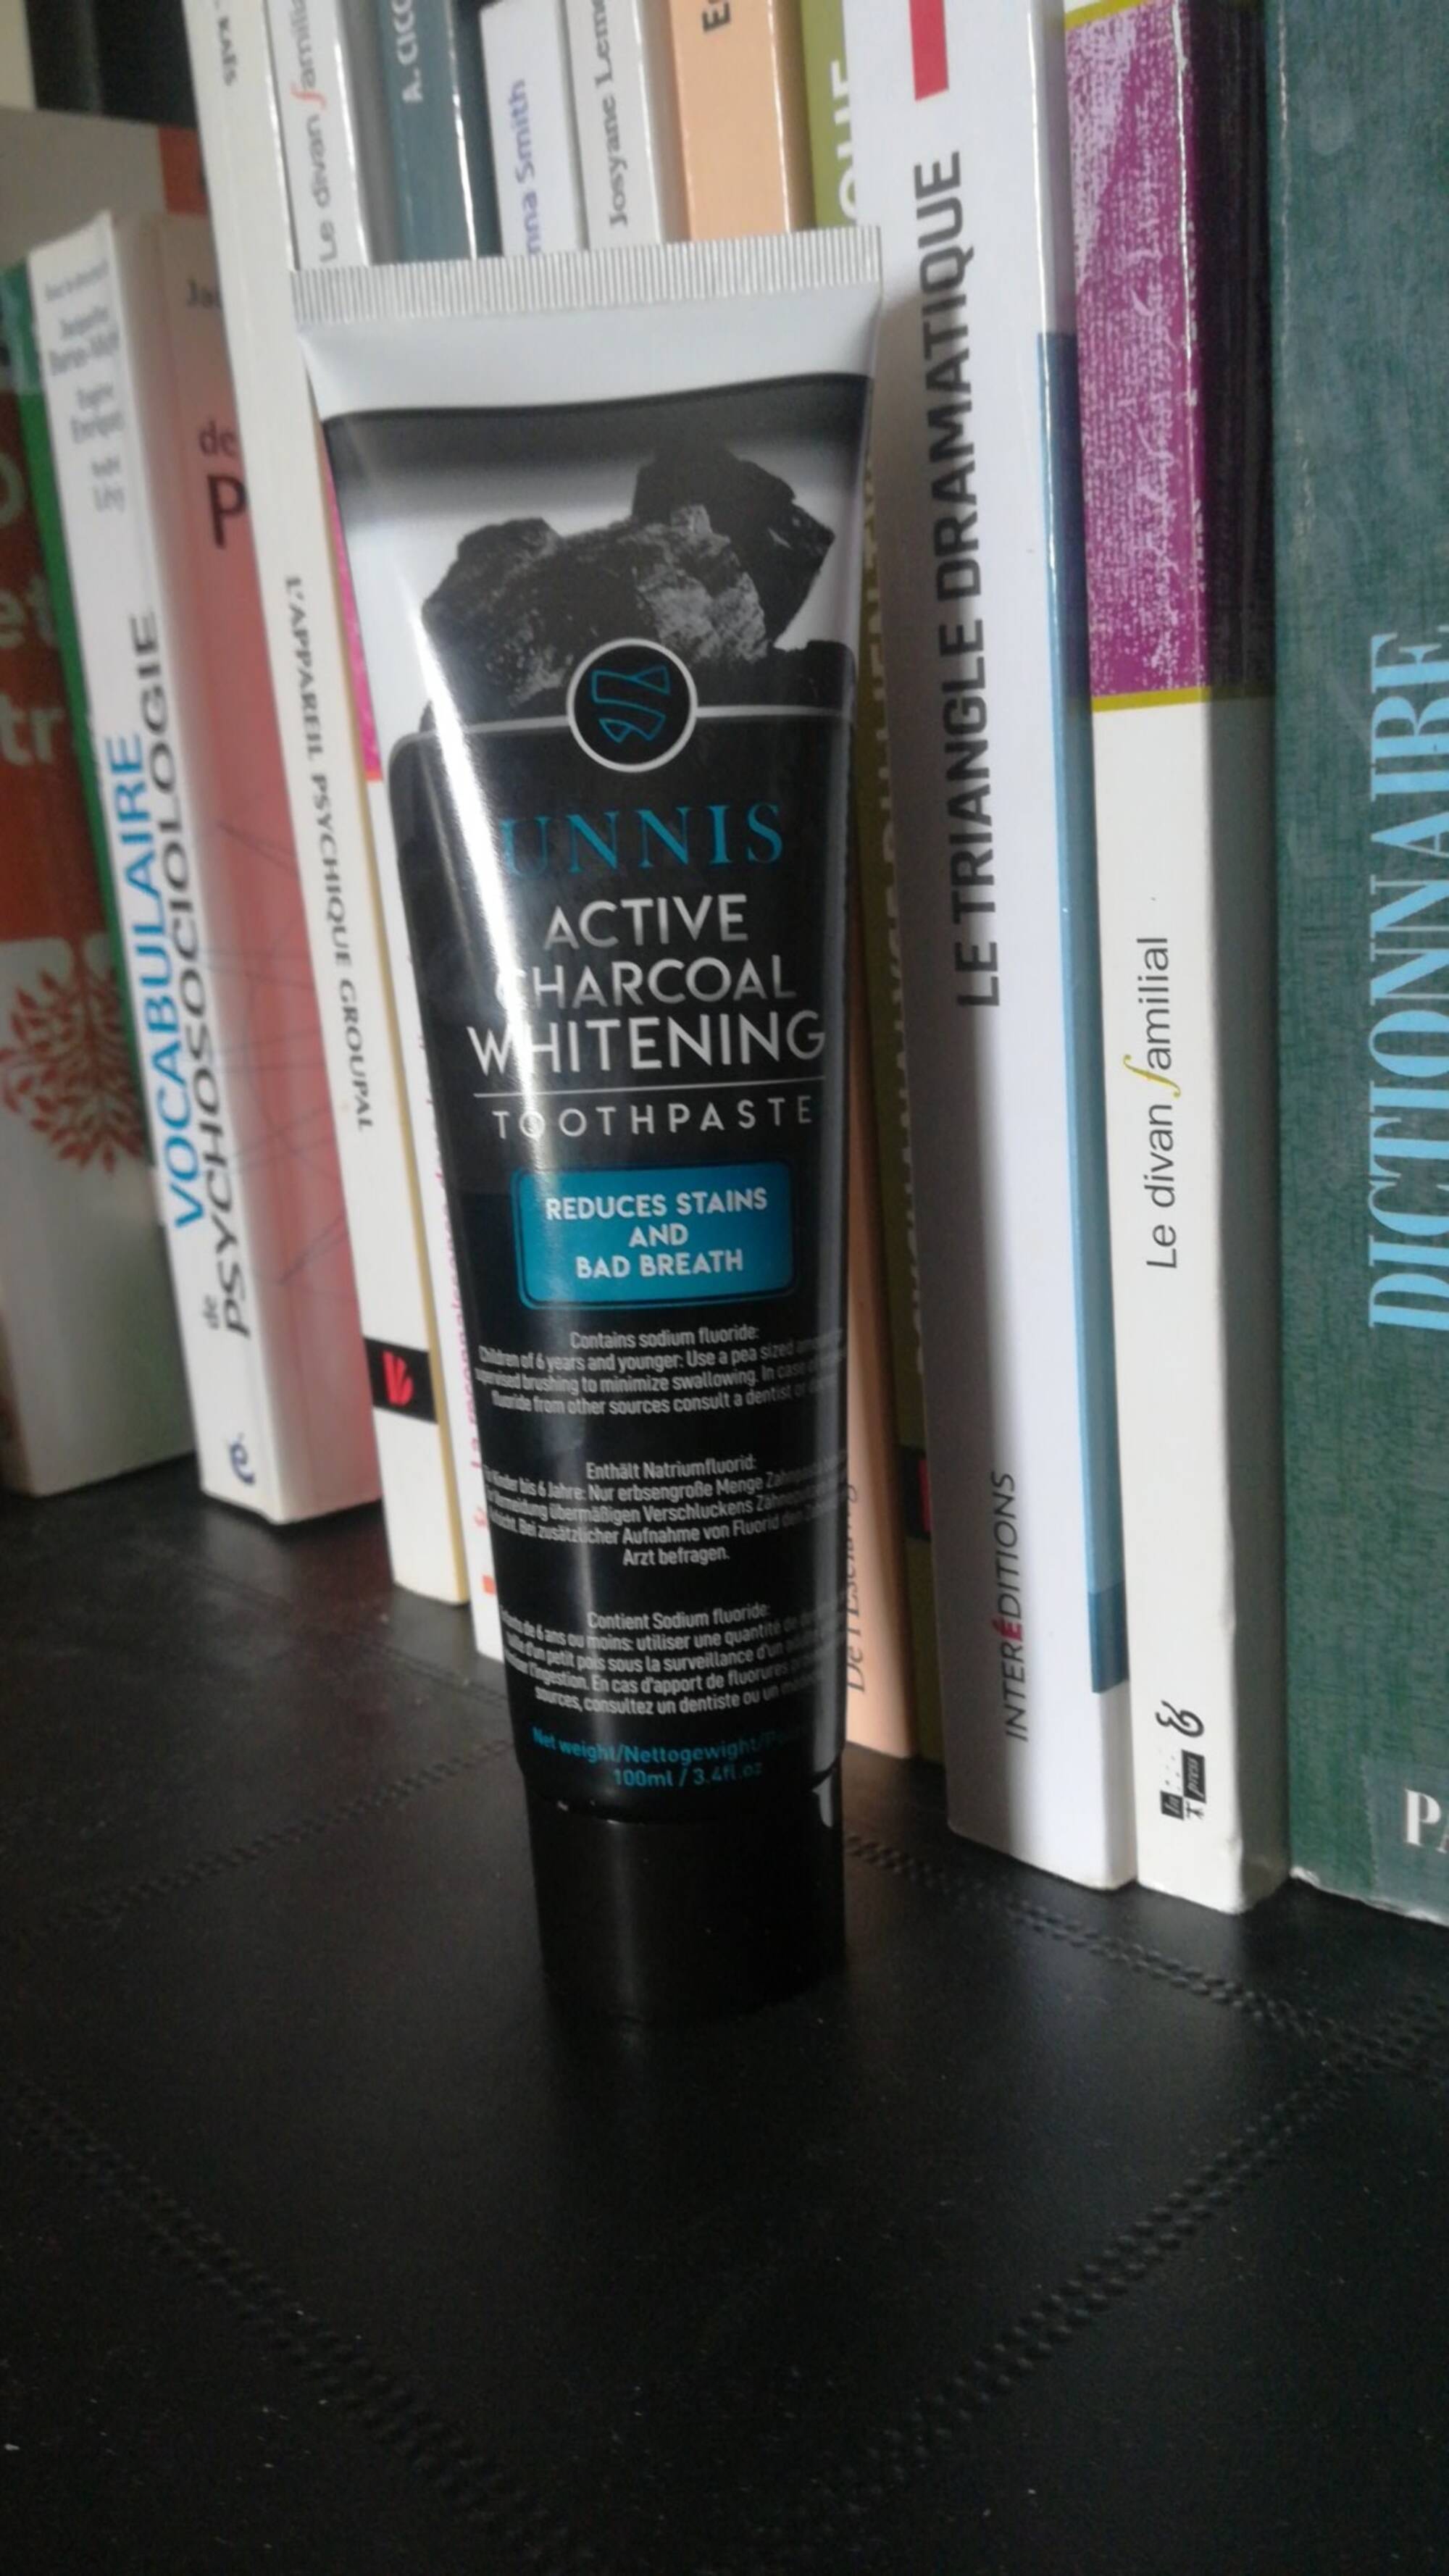 UNNIS - Active charcoal whitening - Toothpaste